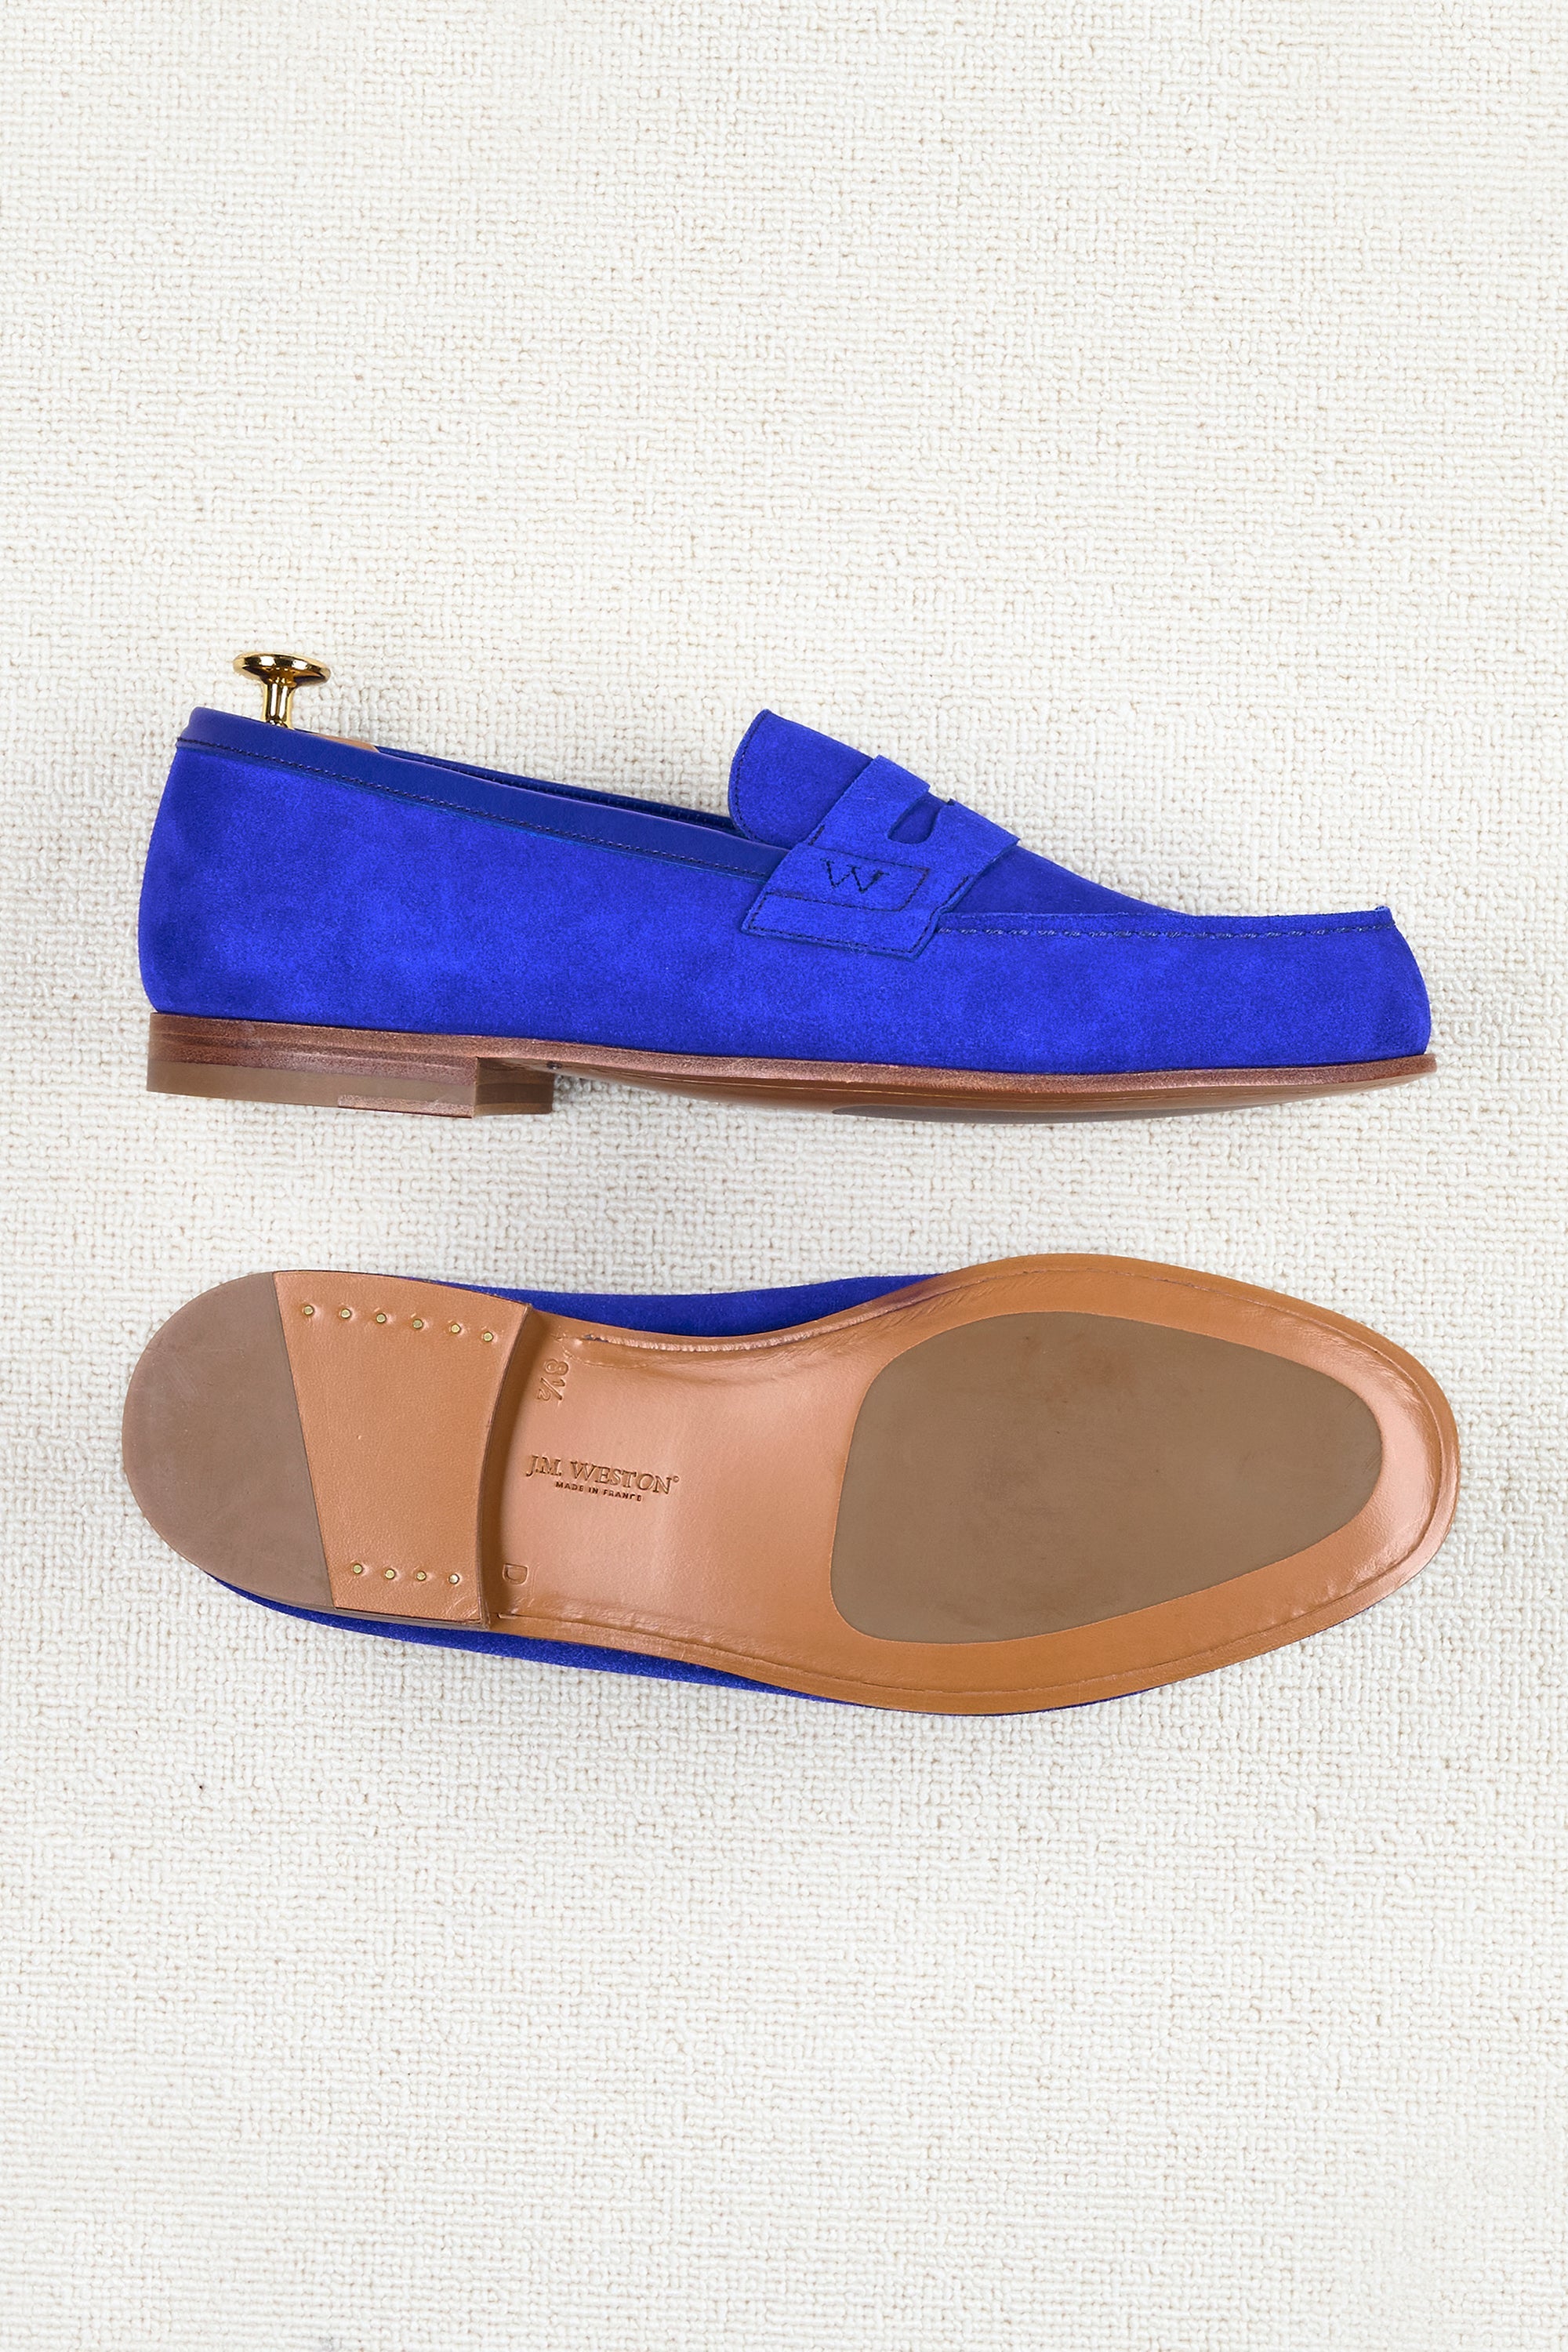 J.M. Weston Blue Suede Penny Loafers